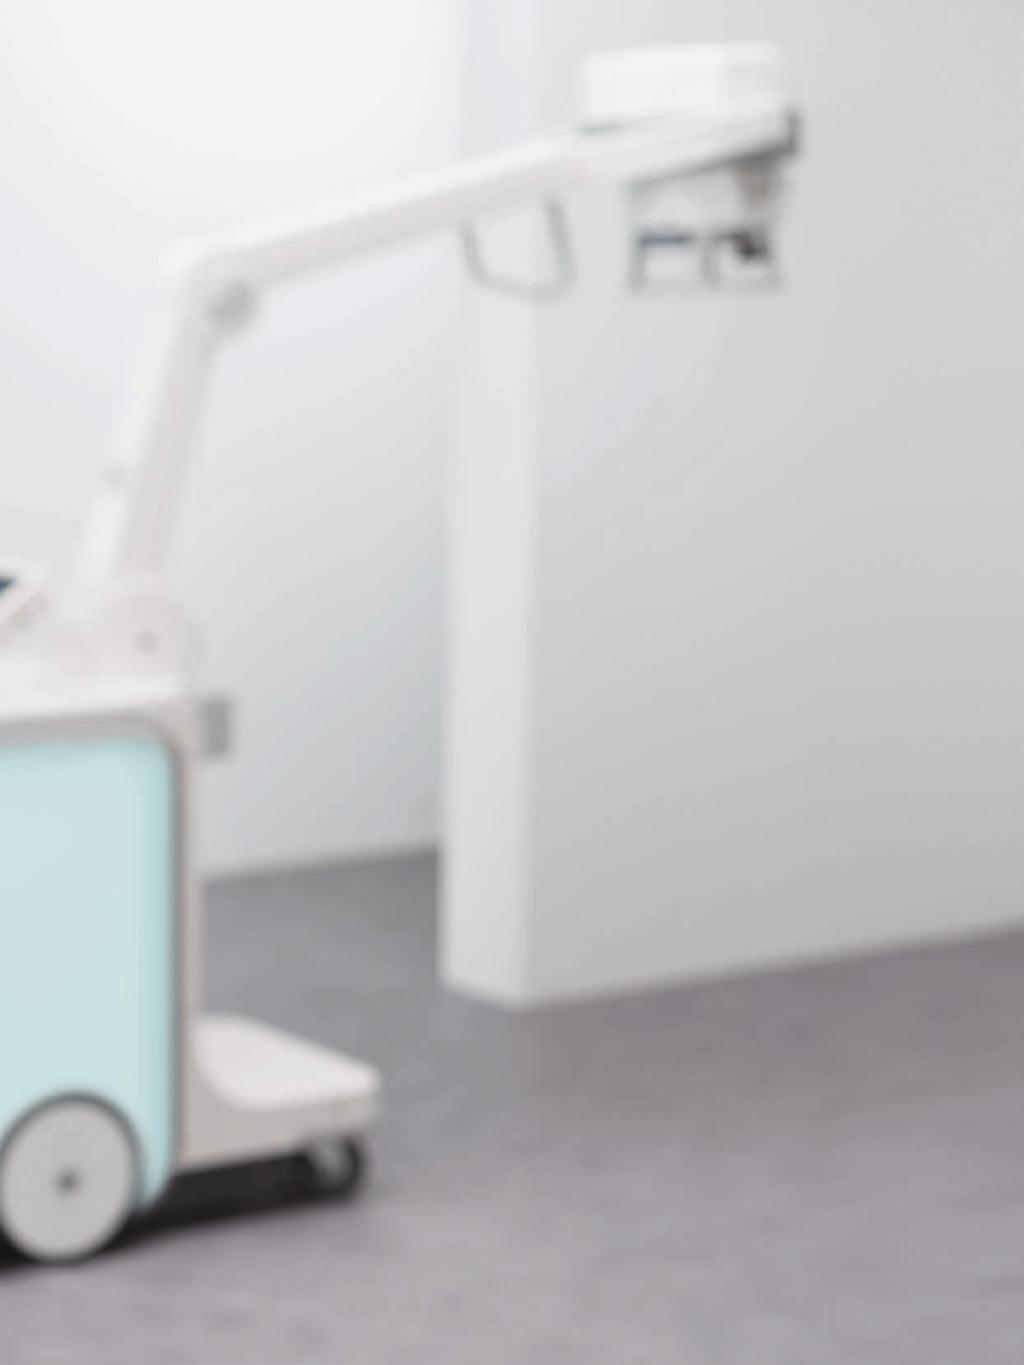 Mobilett Mira Reaching further than ever before in X-ray imaging The name Mobilett stands for mobility: the system is easy to maneuver, fast to use, powerful, and flexible in every situation.